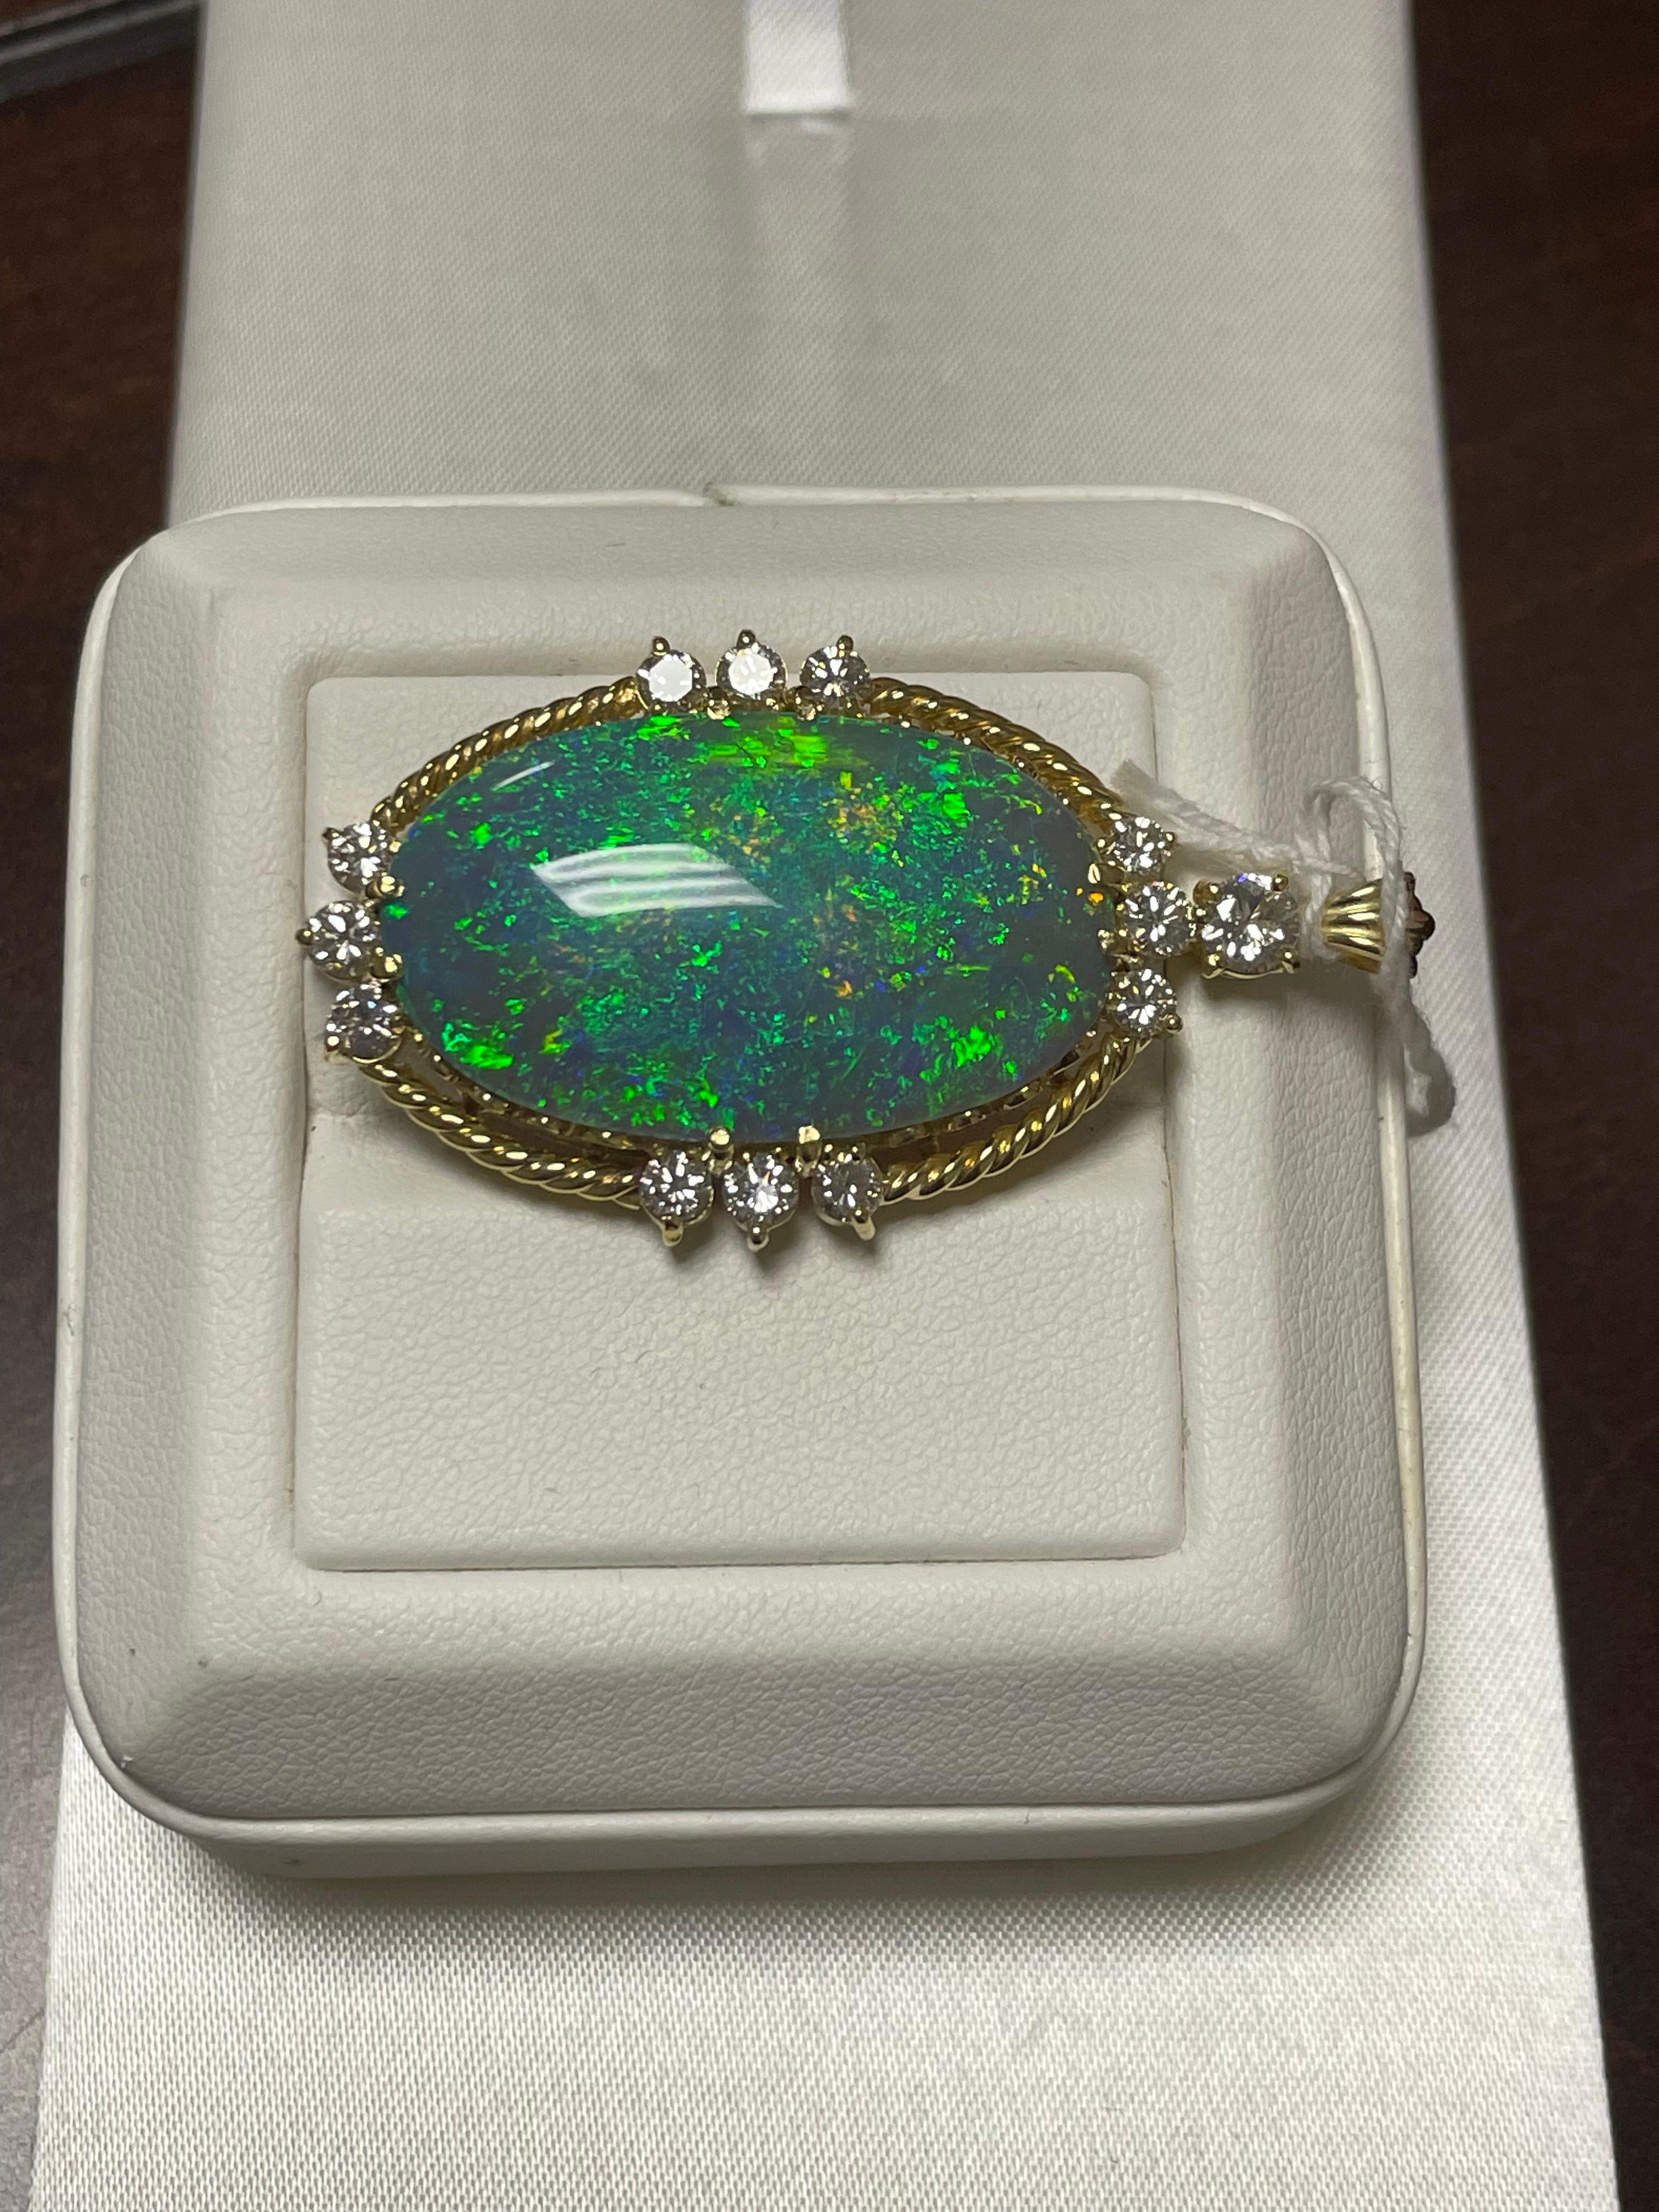 One Lady's semi-black opal with blue/green fire color.  Vivid saturation scaled with pinfire pattern.  Measurements of opal are 32.5 x 19.5 and weight consists of 25.0 carats. Diamonds are 12 round brilliant-cut measuring 4.5-3.0 mm.  Weight is 1.35